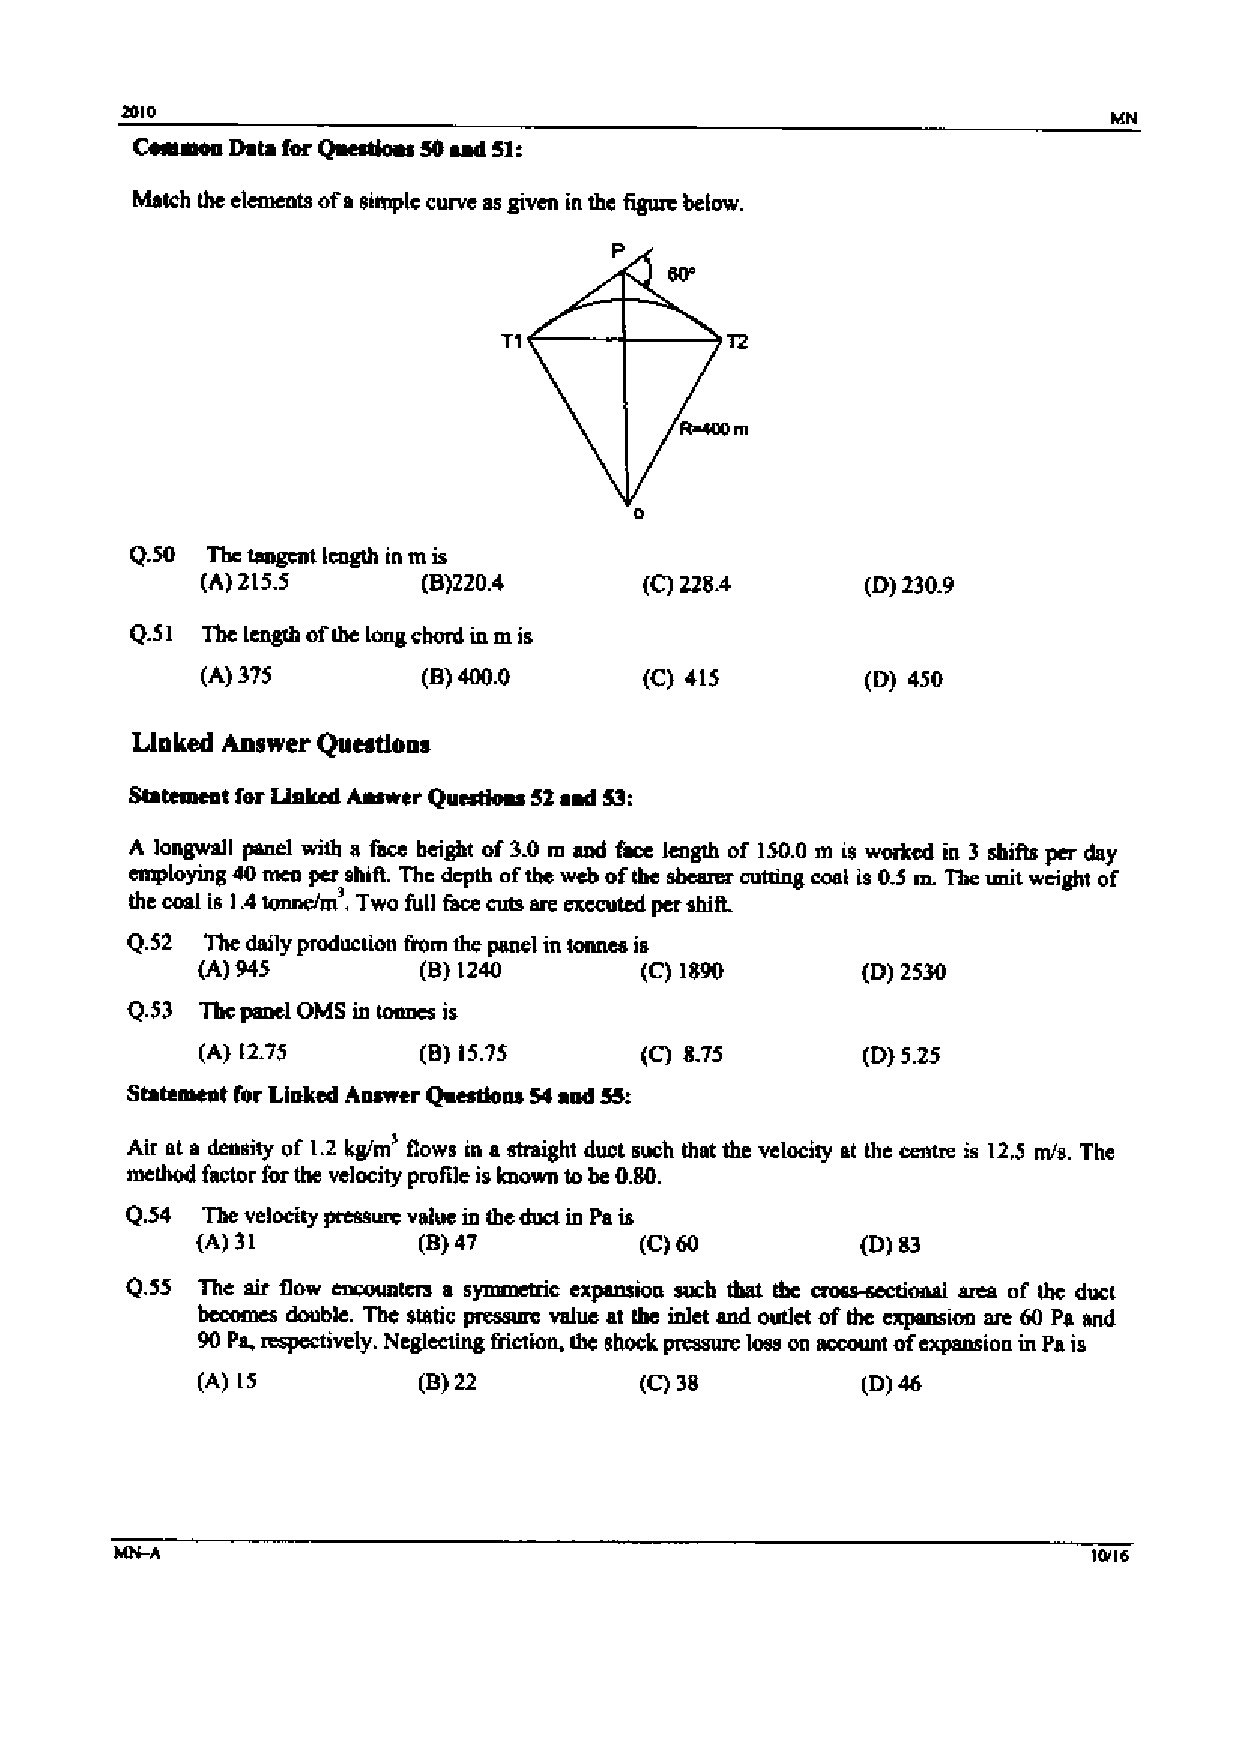 GATE Exam Question Paper 2010 Mining Engineering 10